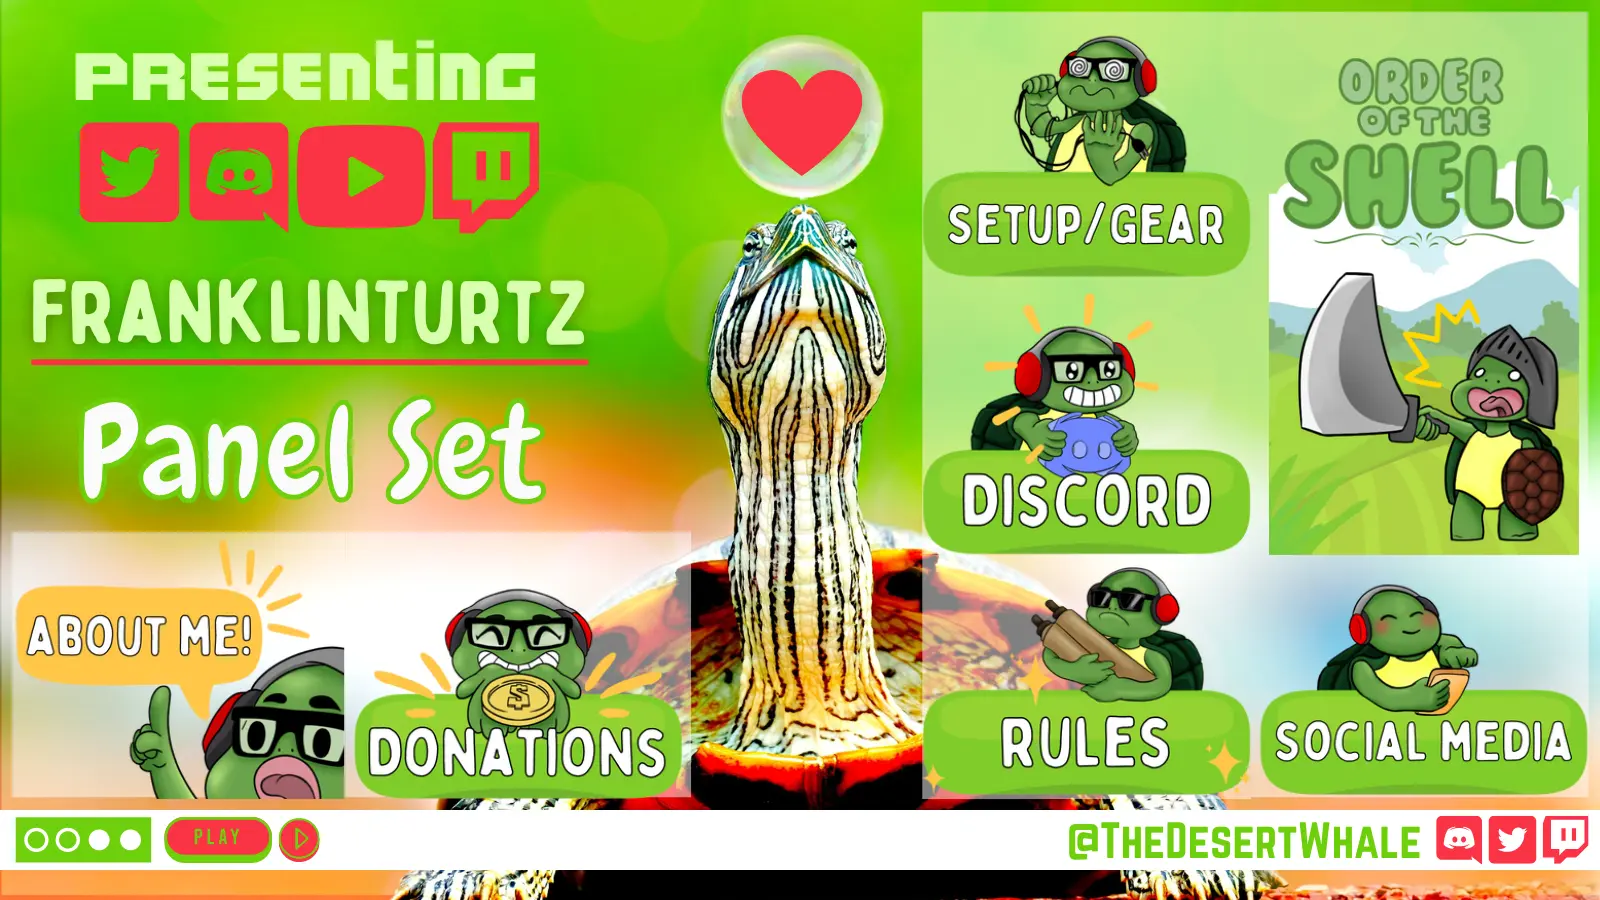 A new batch of turtle themed emotes for FranklinTurtz on Twitch